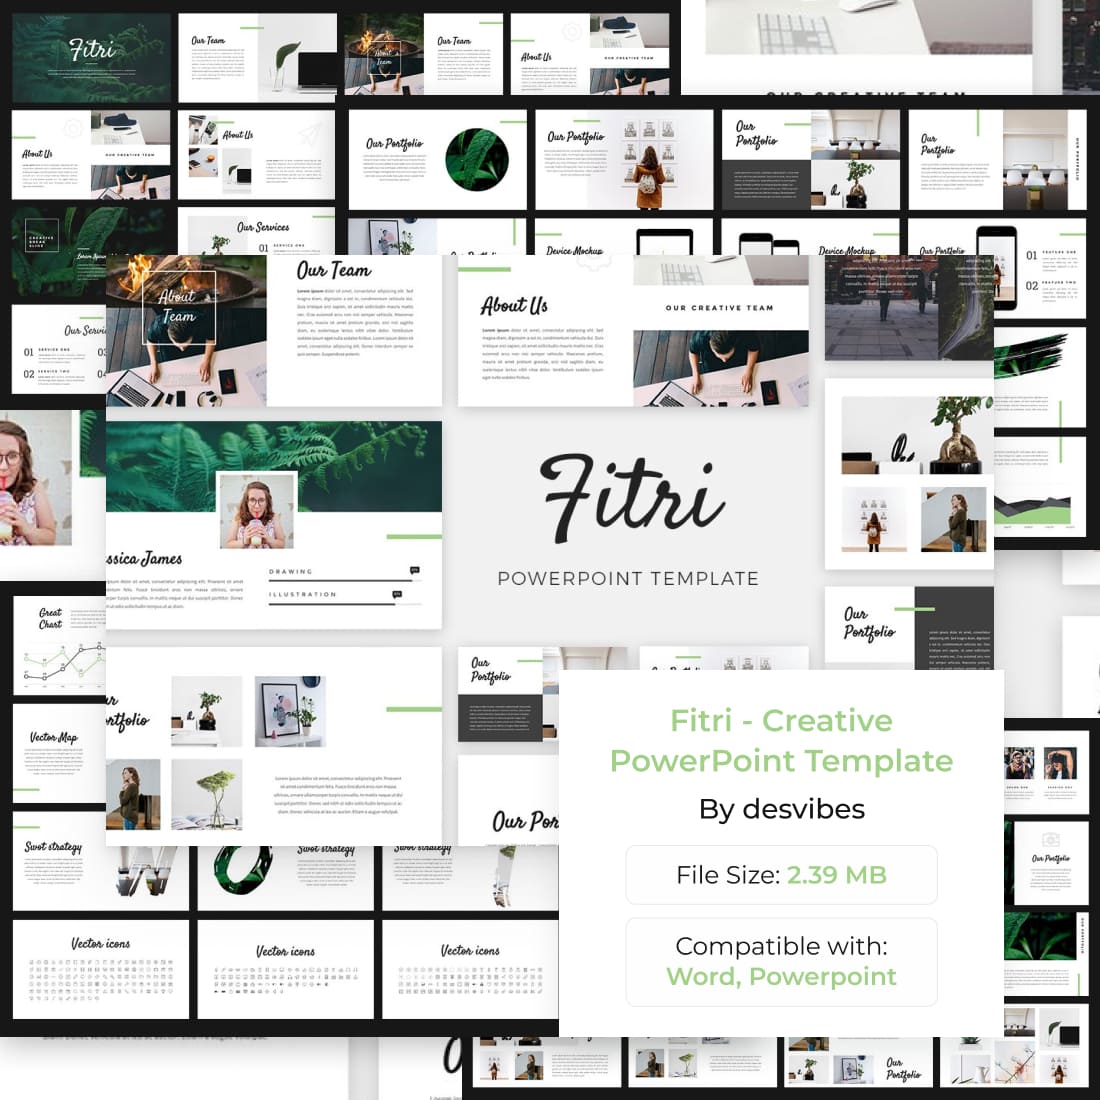 01 Fitri Creative PowerPoint Template 1100x1100 1